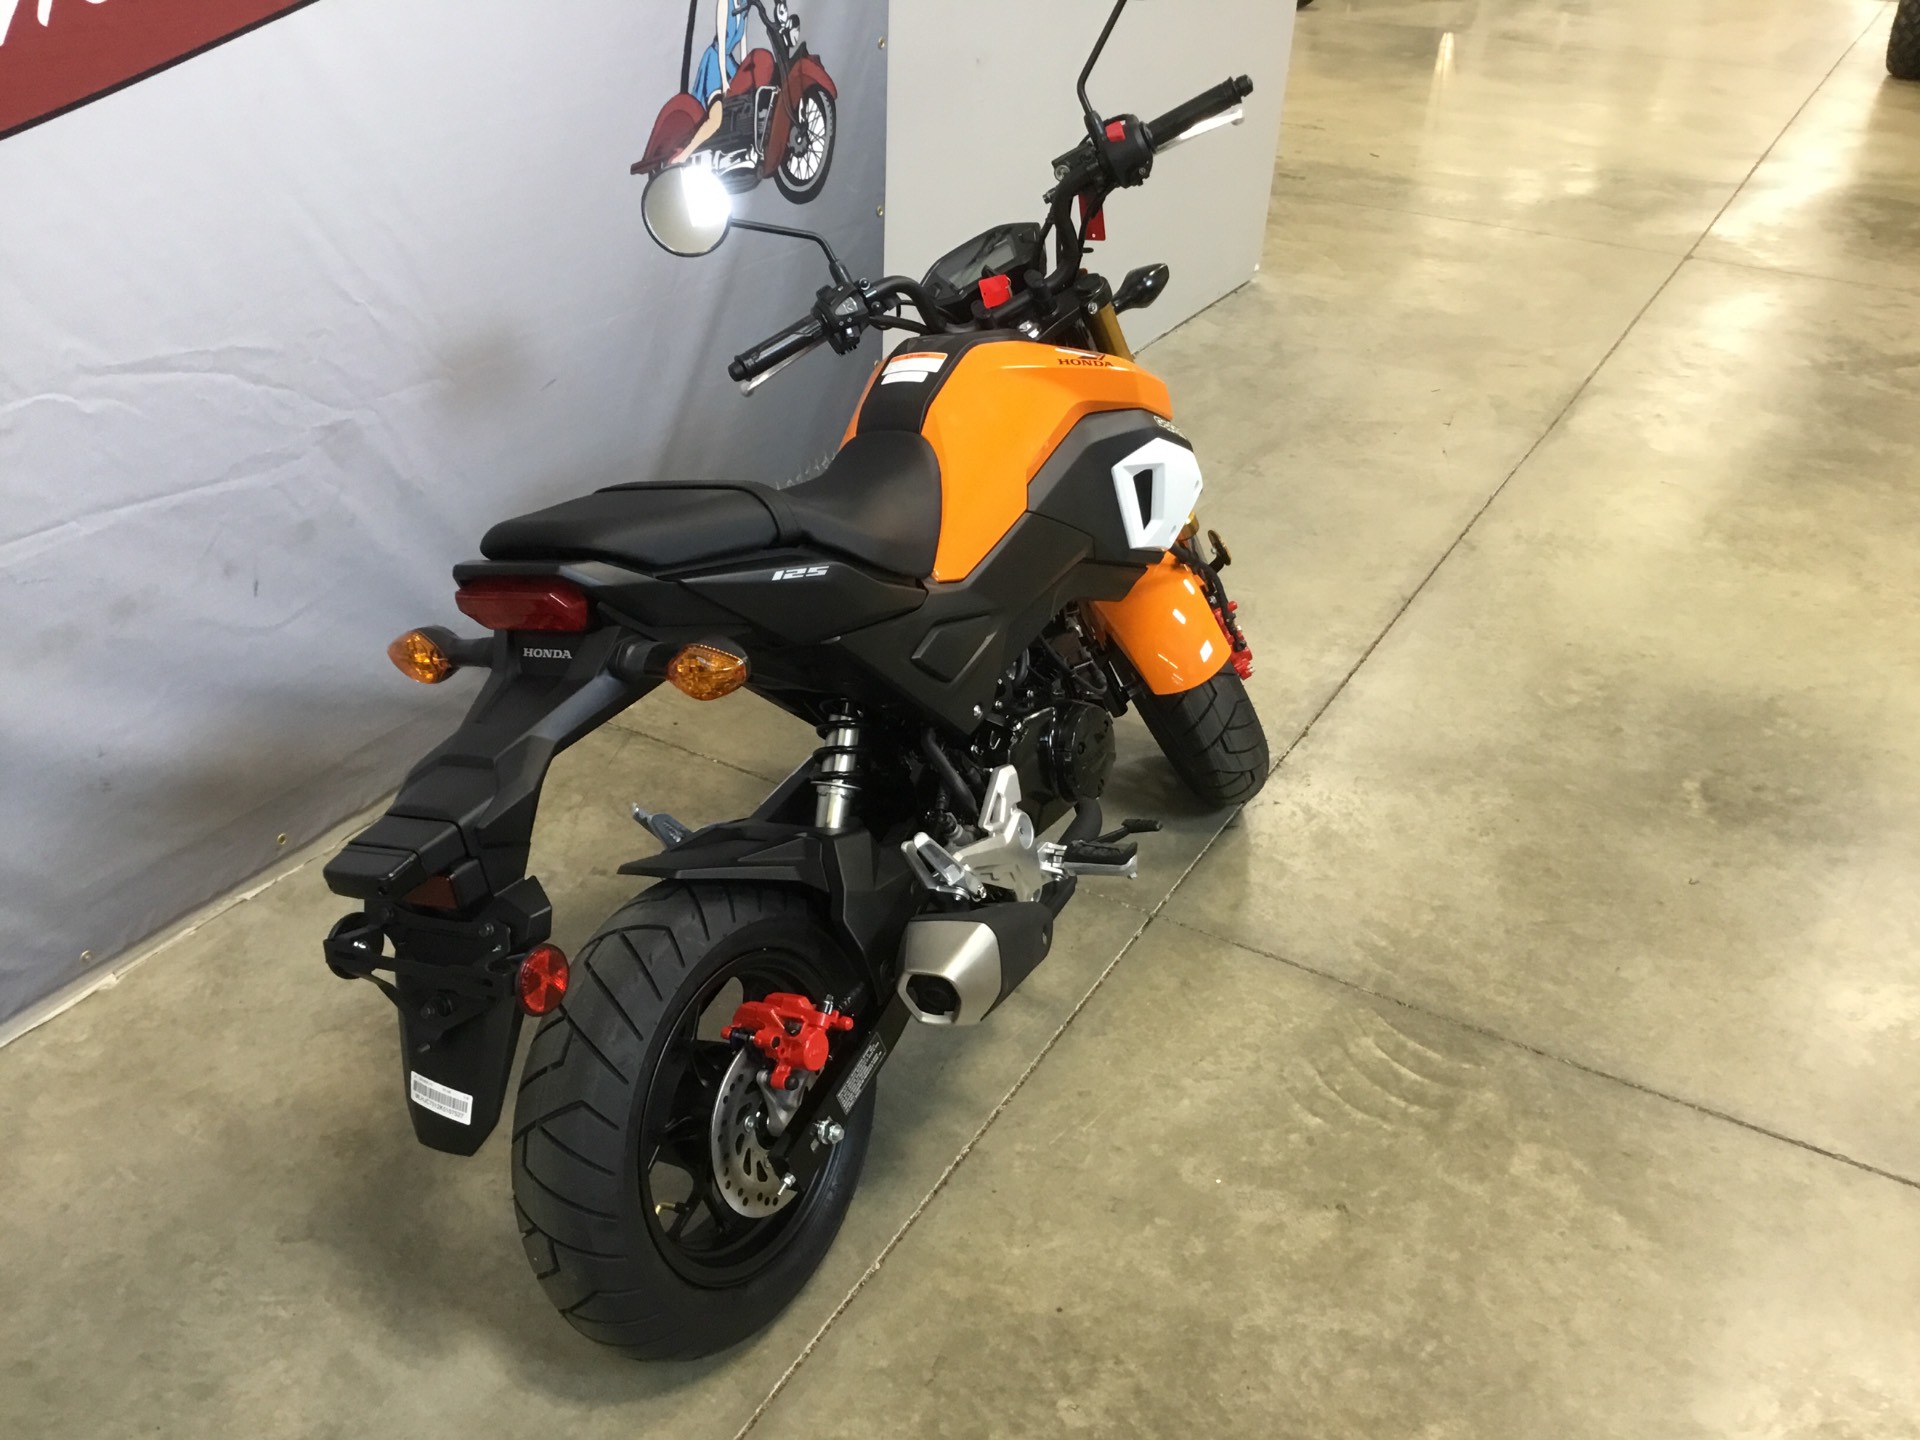 2019 Honda Grom In O Fallon, Illinois - Motorcycle , HD Wallpaper & Backgrounds